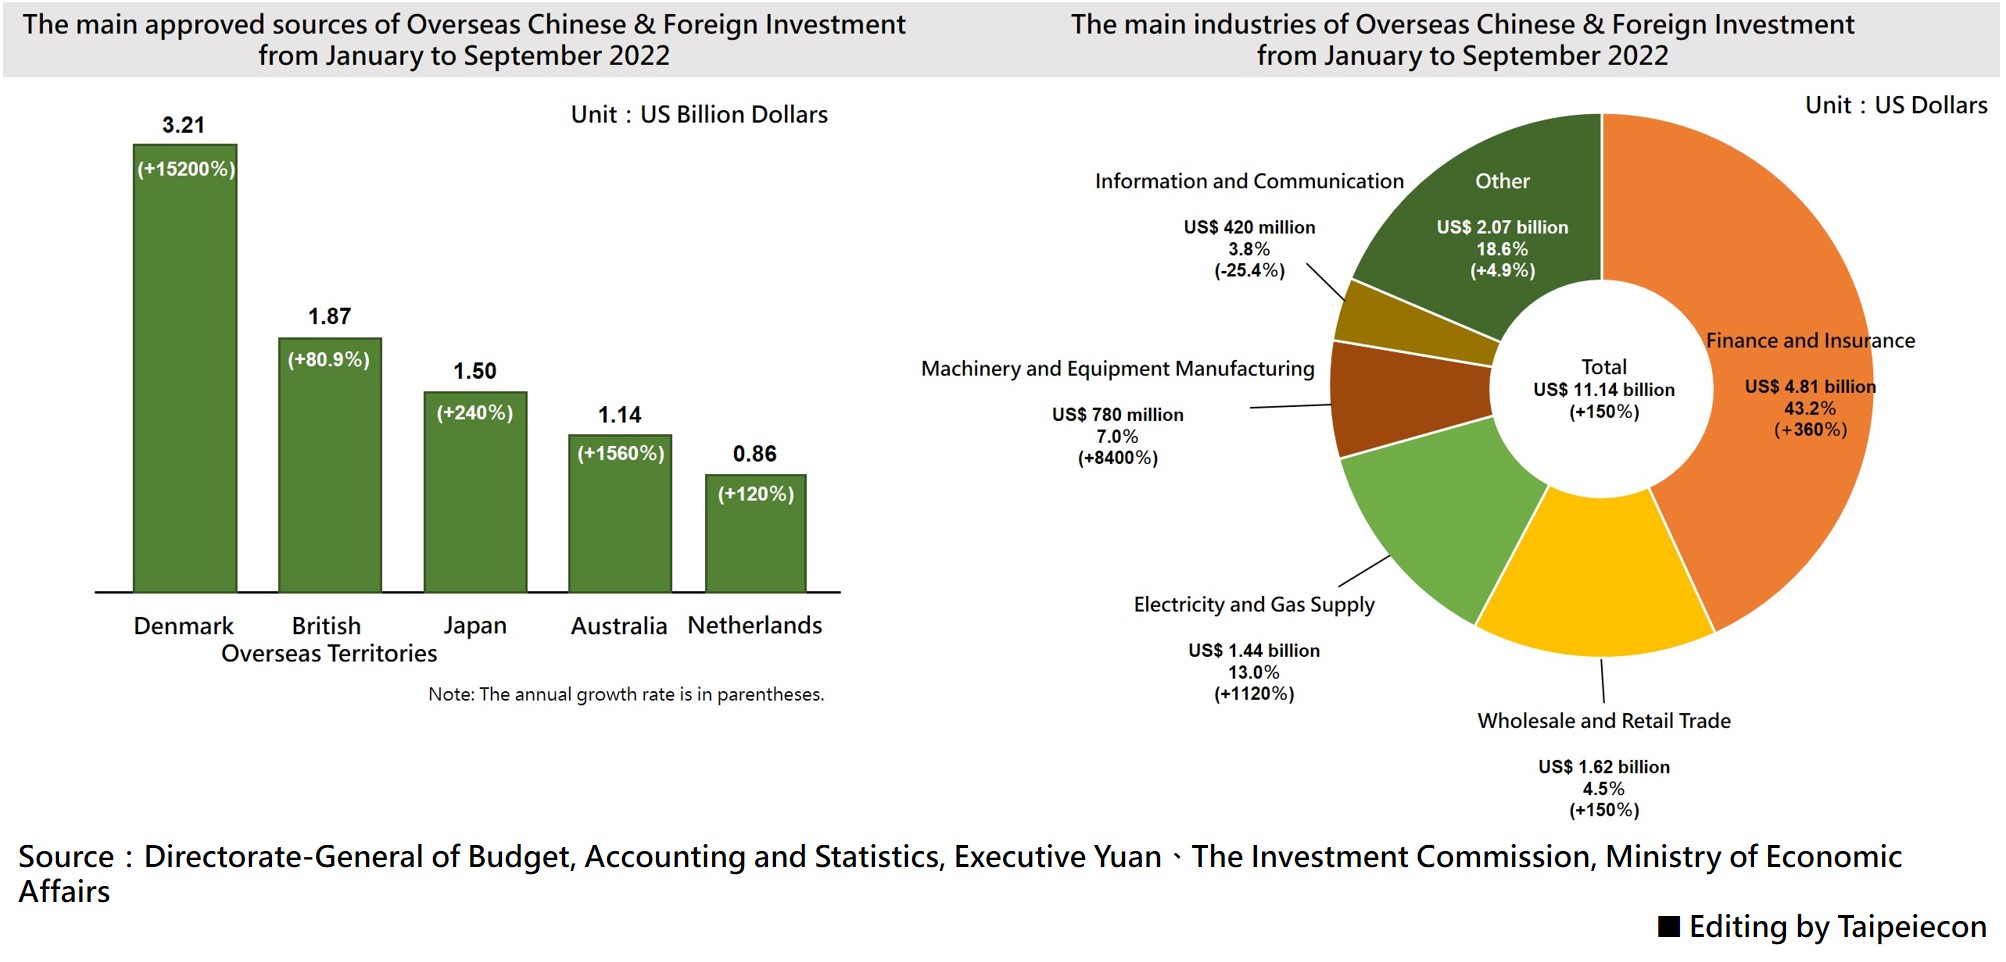 Approved Overseas Chinese and Foreign Investment in the period from January to September 2022